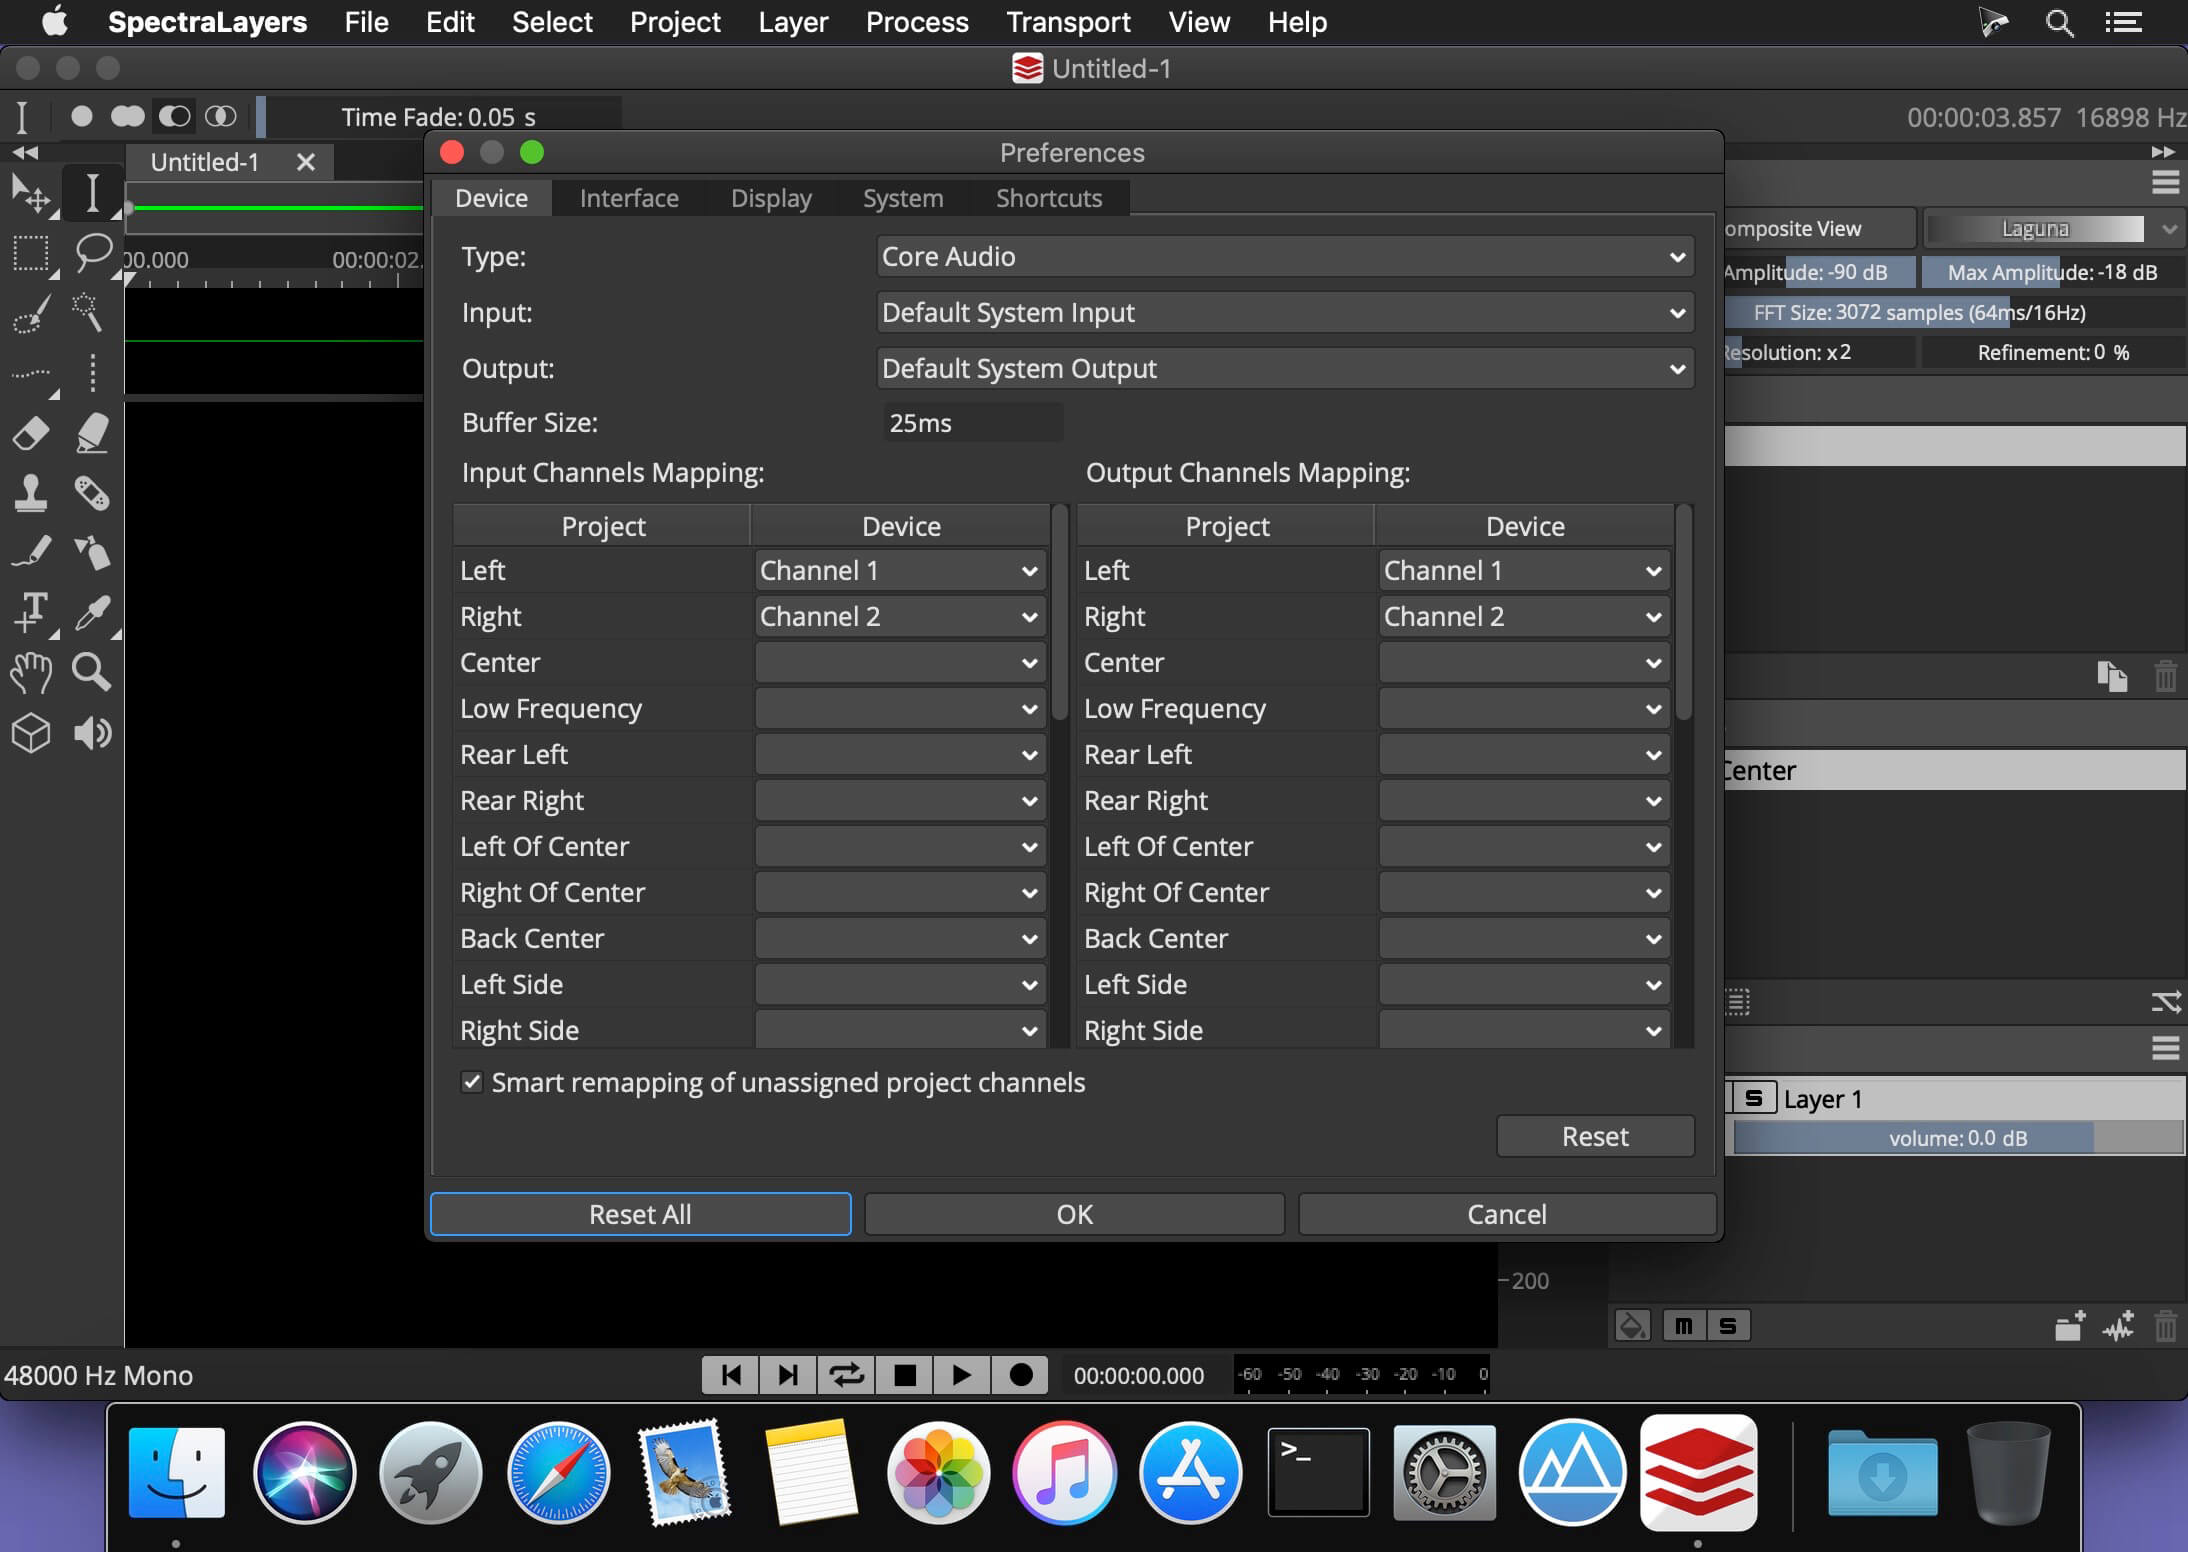 for iphone instal MAGIX / Steinberg SpectraLayers Pro 10.0.10.329 free